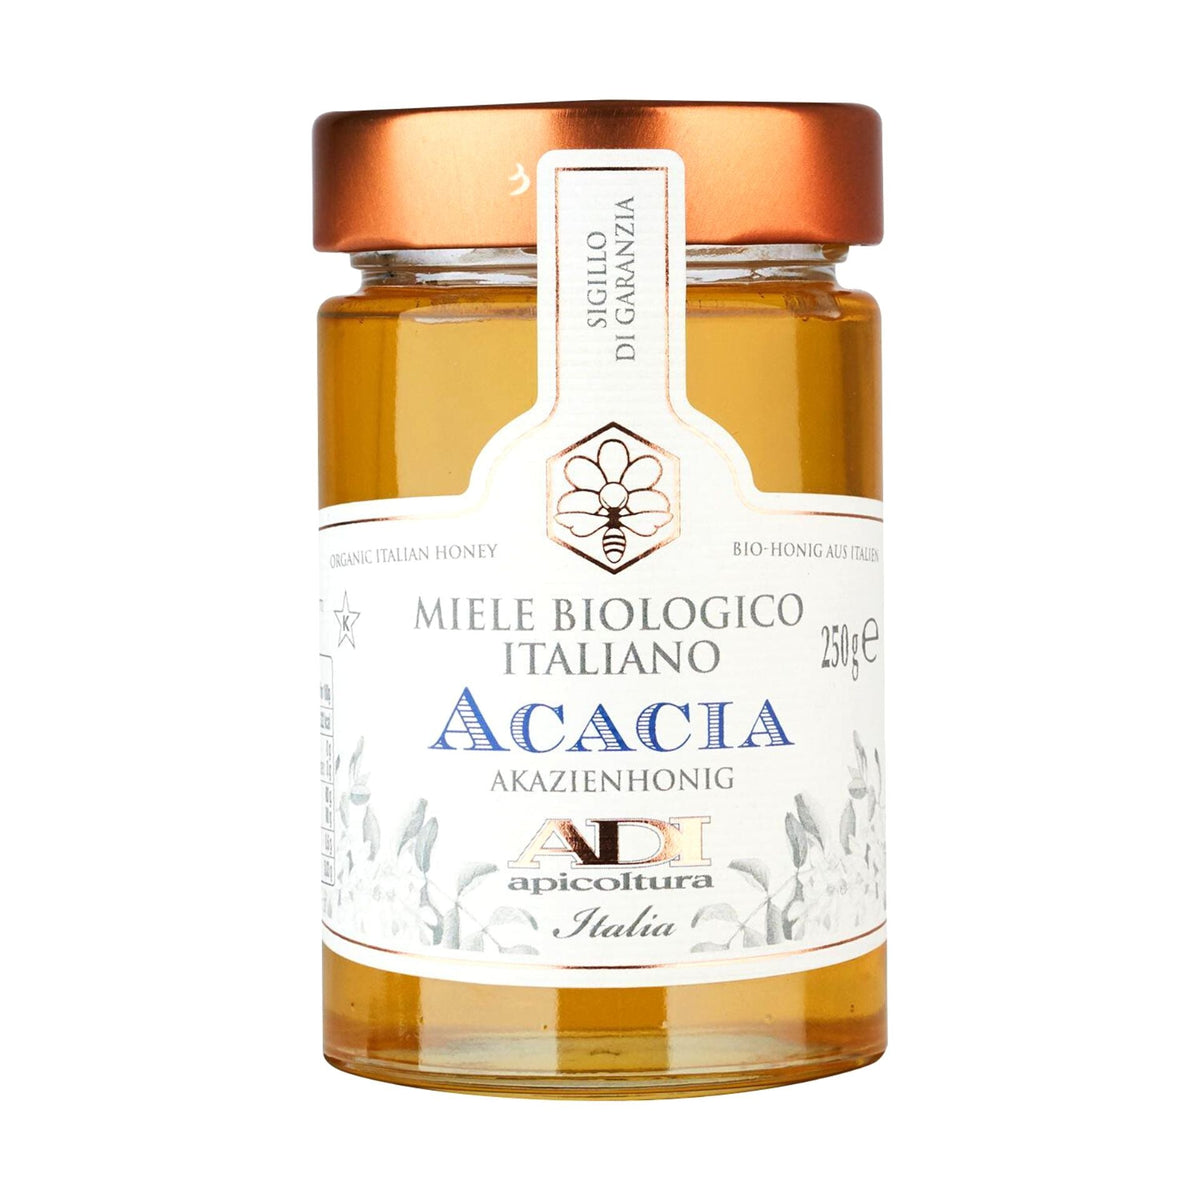 Adi Apicoltori Organic Acacia Honey 250g  | Imported and distributed in the UK by Just Gourmet Foods